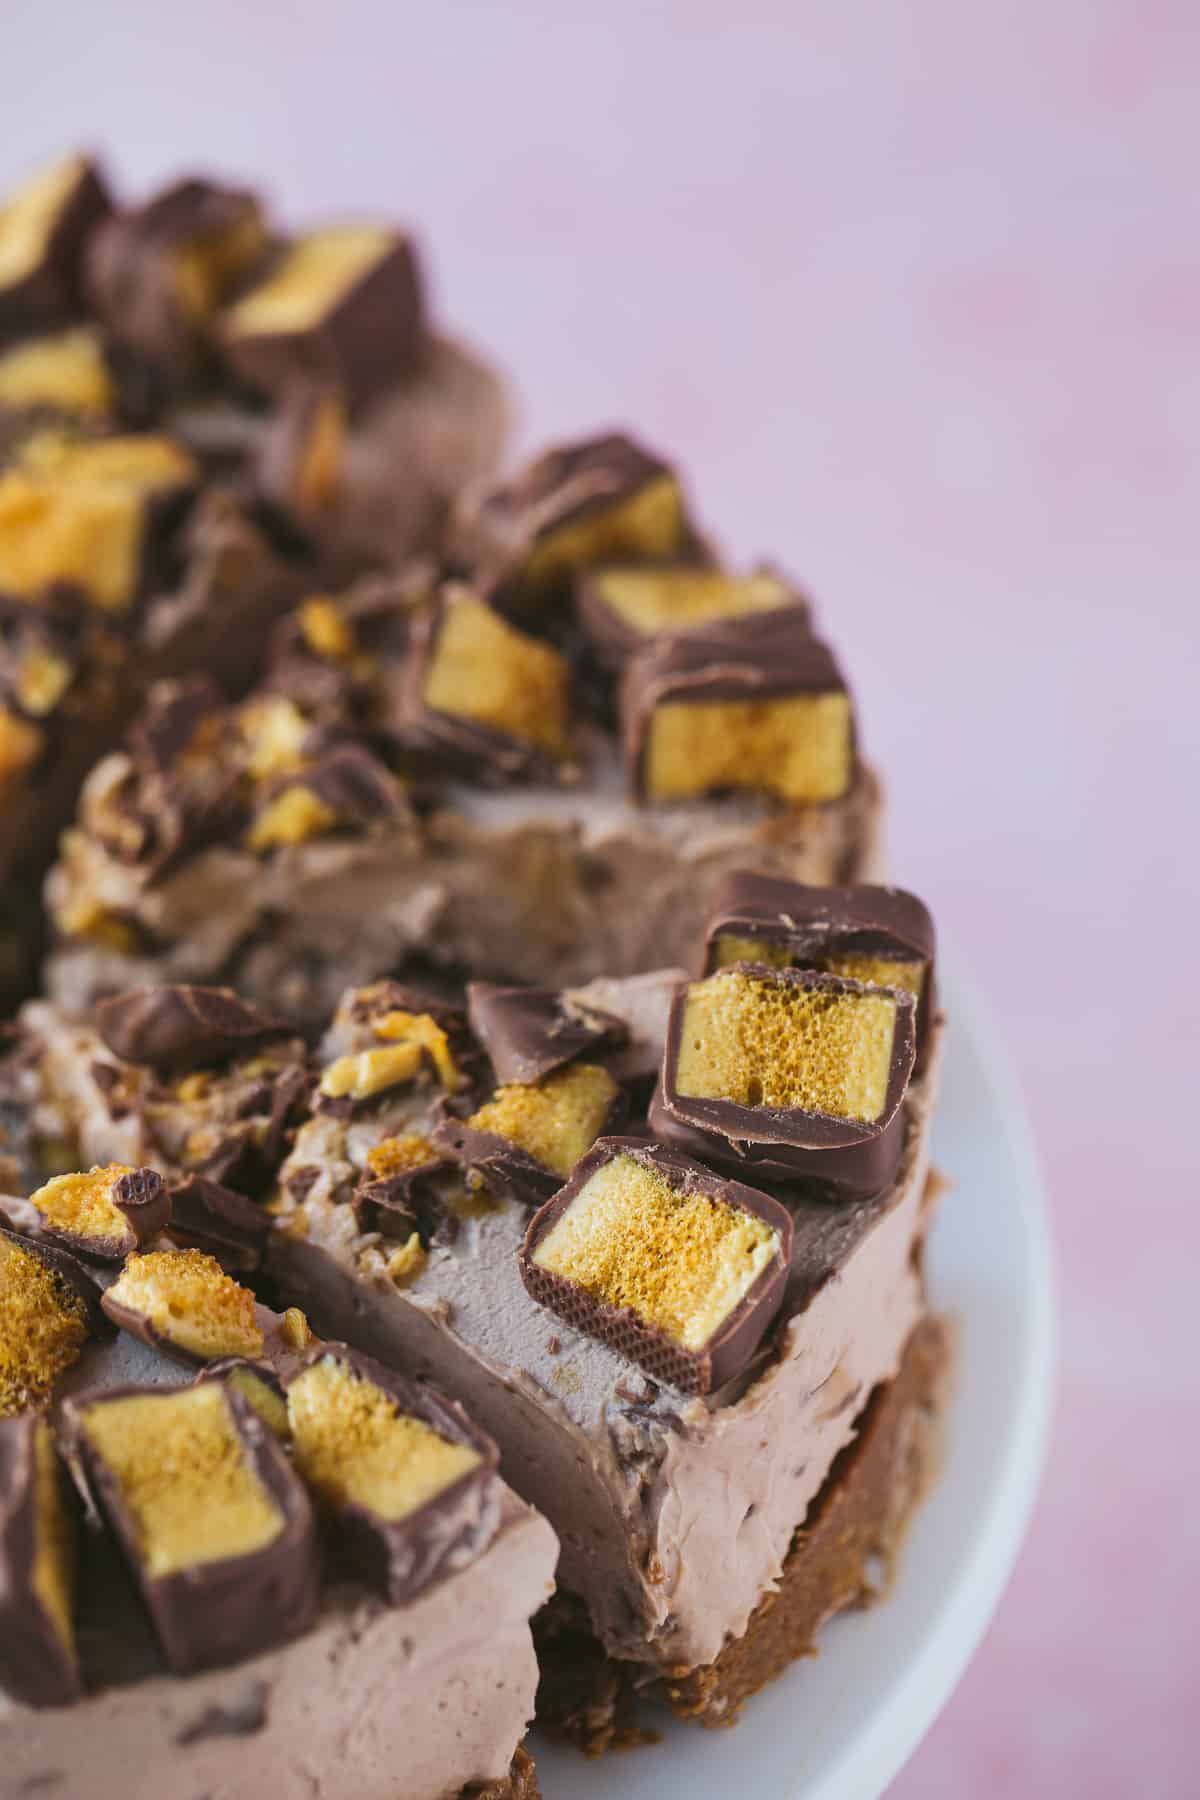 Slices of a no bake chocolate cheesecake that has been topped with pieces of Crunchie bar. 